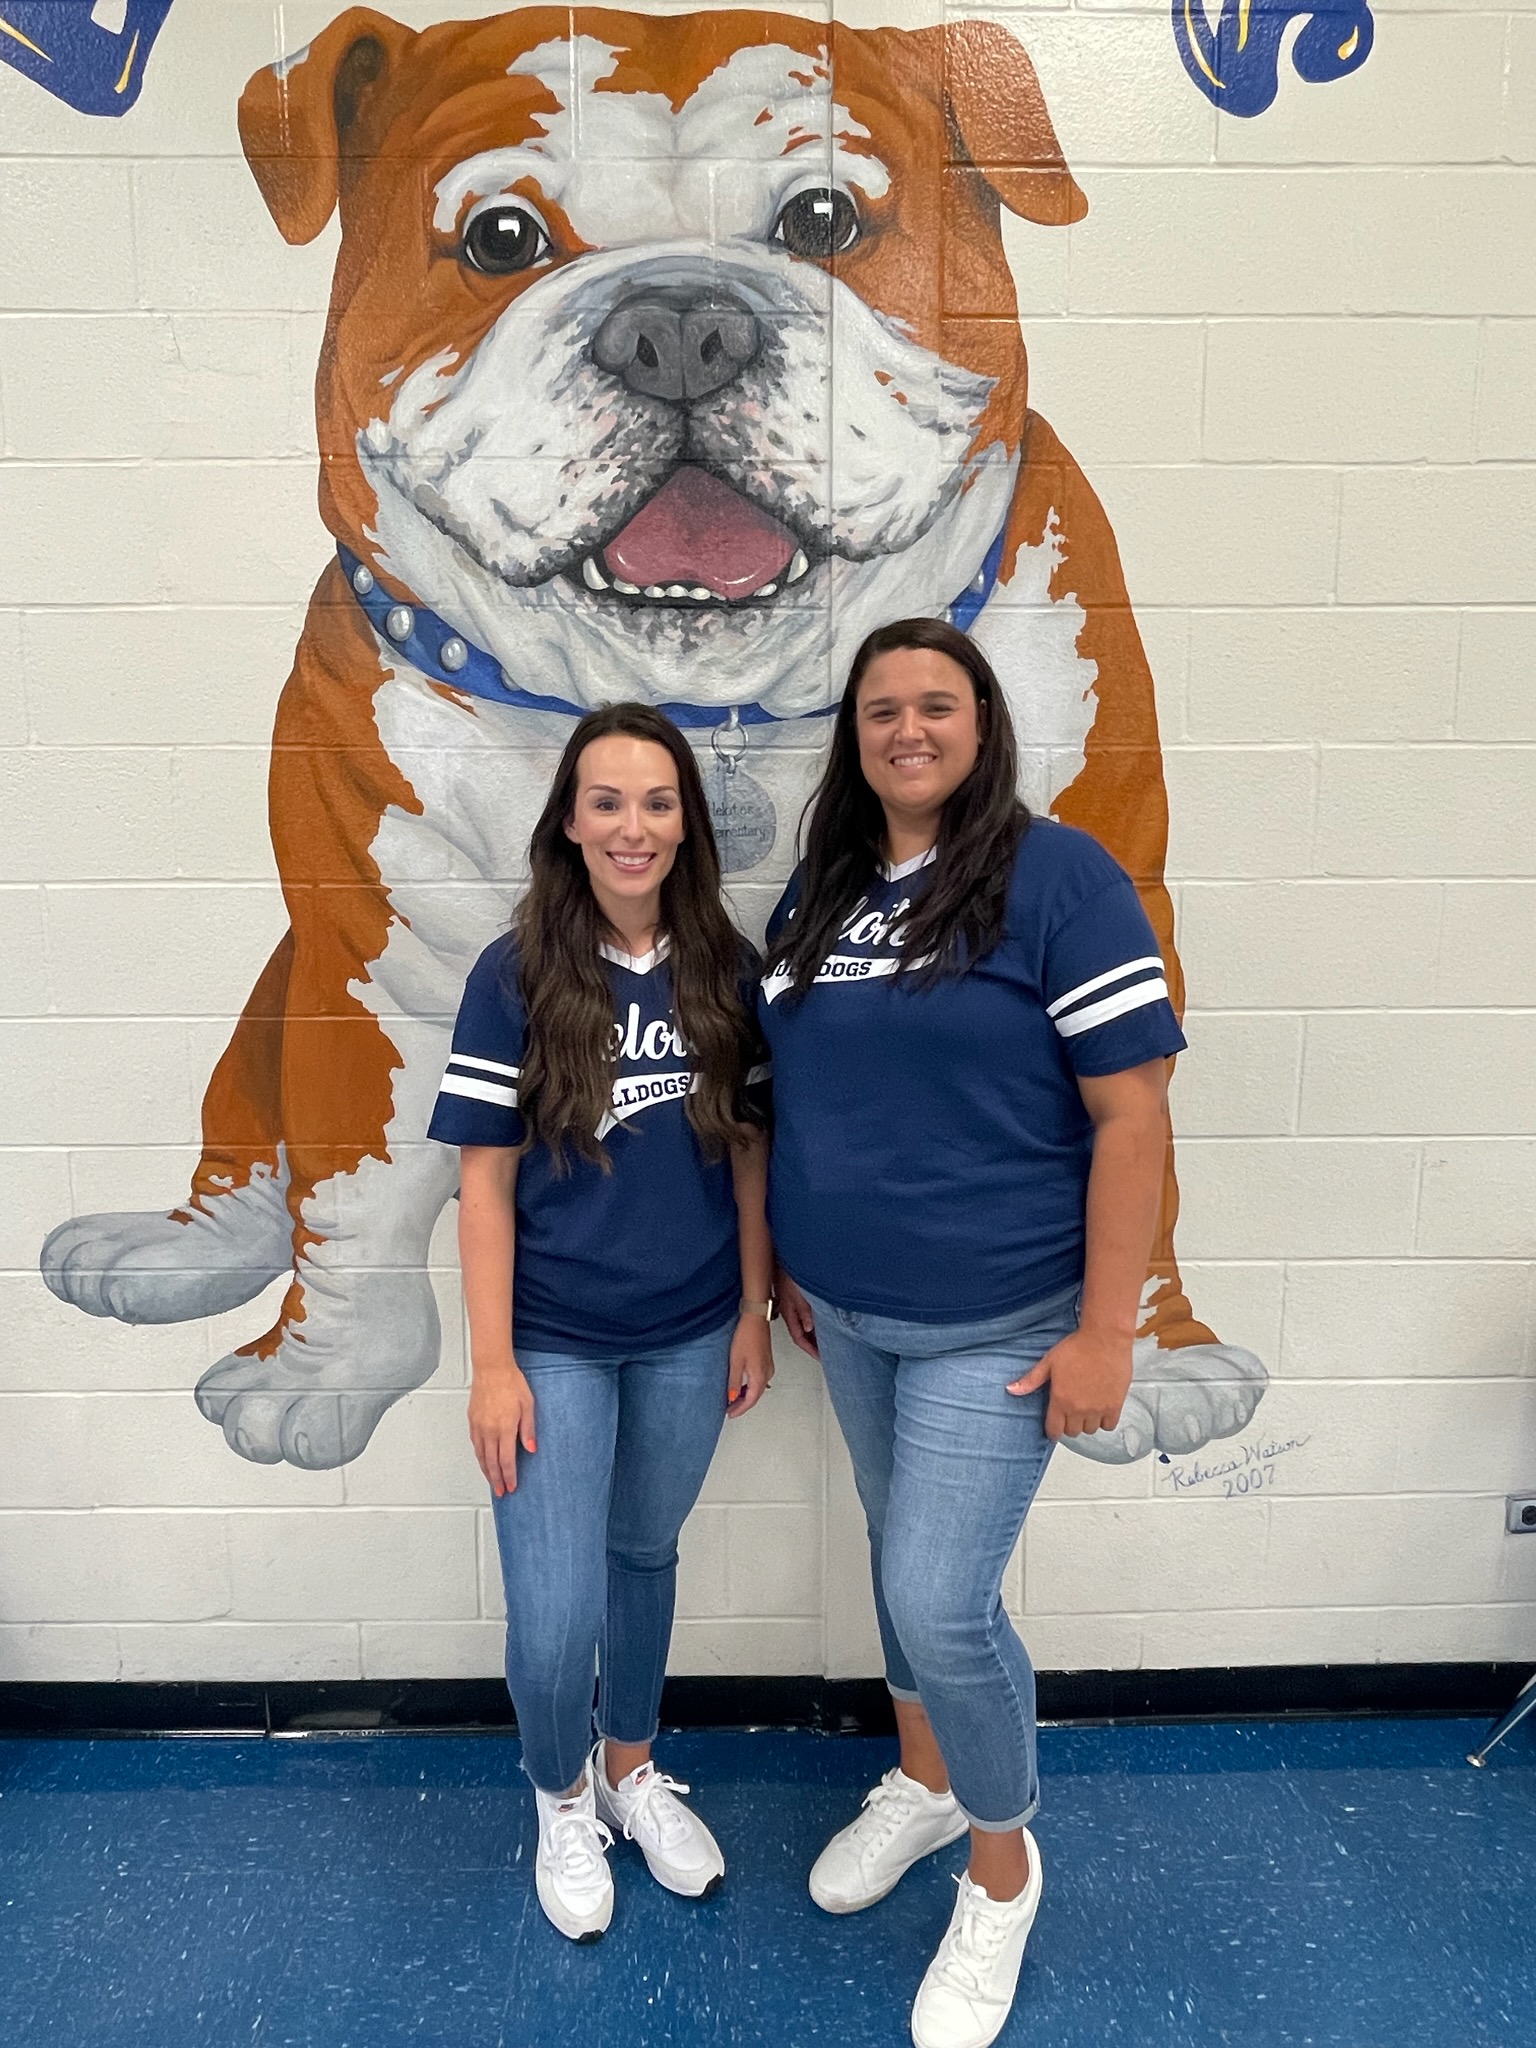 Pic of second grade teachers in front of bulldog mural